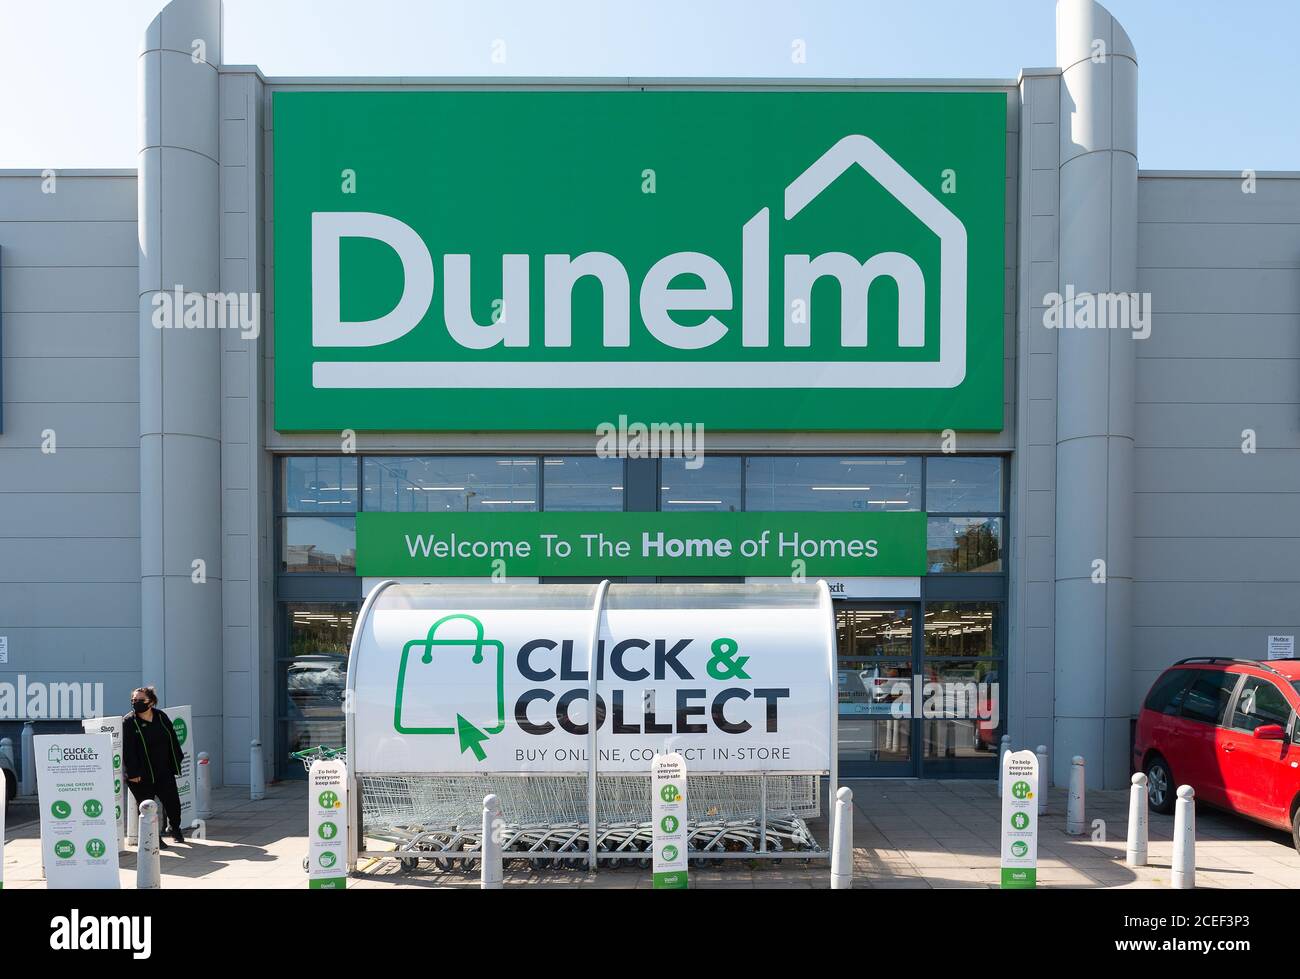 Slough, Berkshire, UK. 1st September, 2020. Homewares retailer Dunelm has reported an increase in sales of 59% during July following the reopening of their stores after the Coronavirus lockdown. Pictured Dunelm at the Bath Road Westgate Retail Park in Slough. Credit: Maureen McLean/Alamy Live News Stock Photo